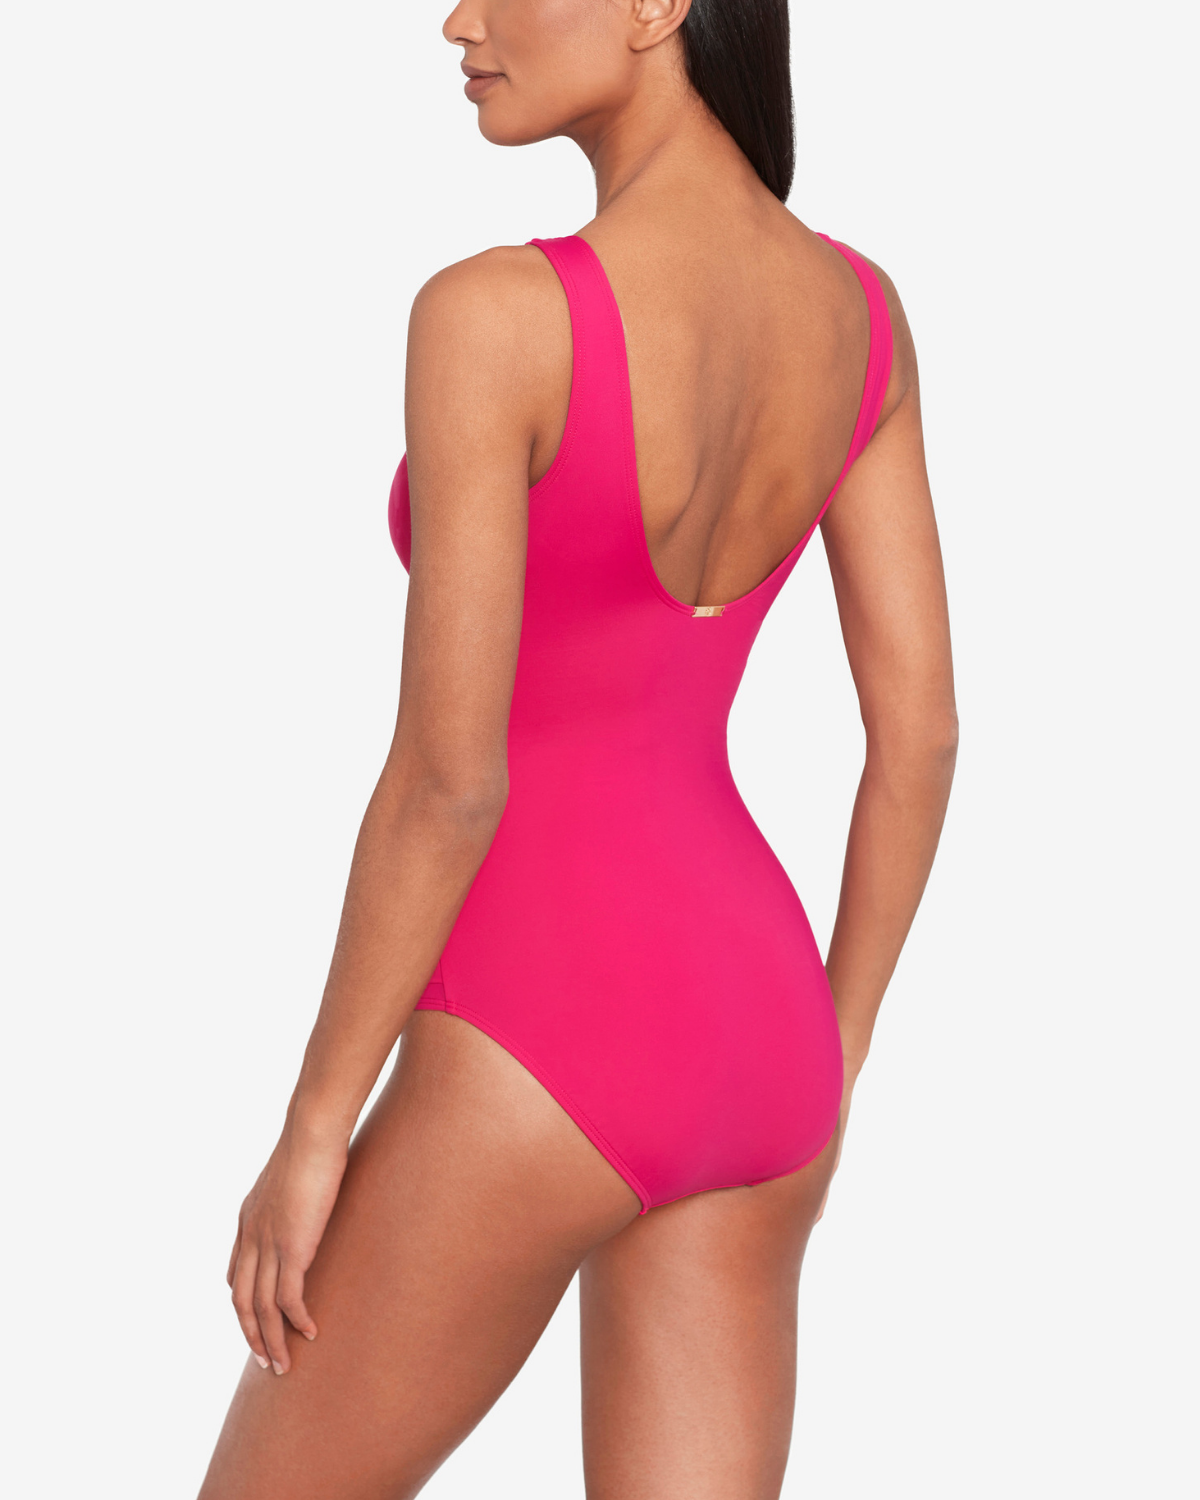 Model wearing a v-neck one piece with a ruffle trim and shirred panel around the torso in pink